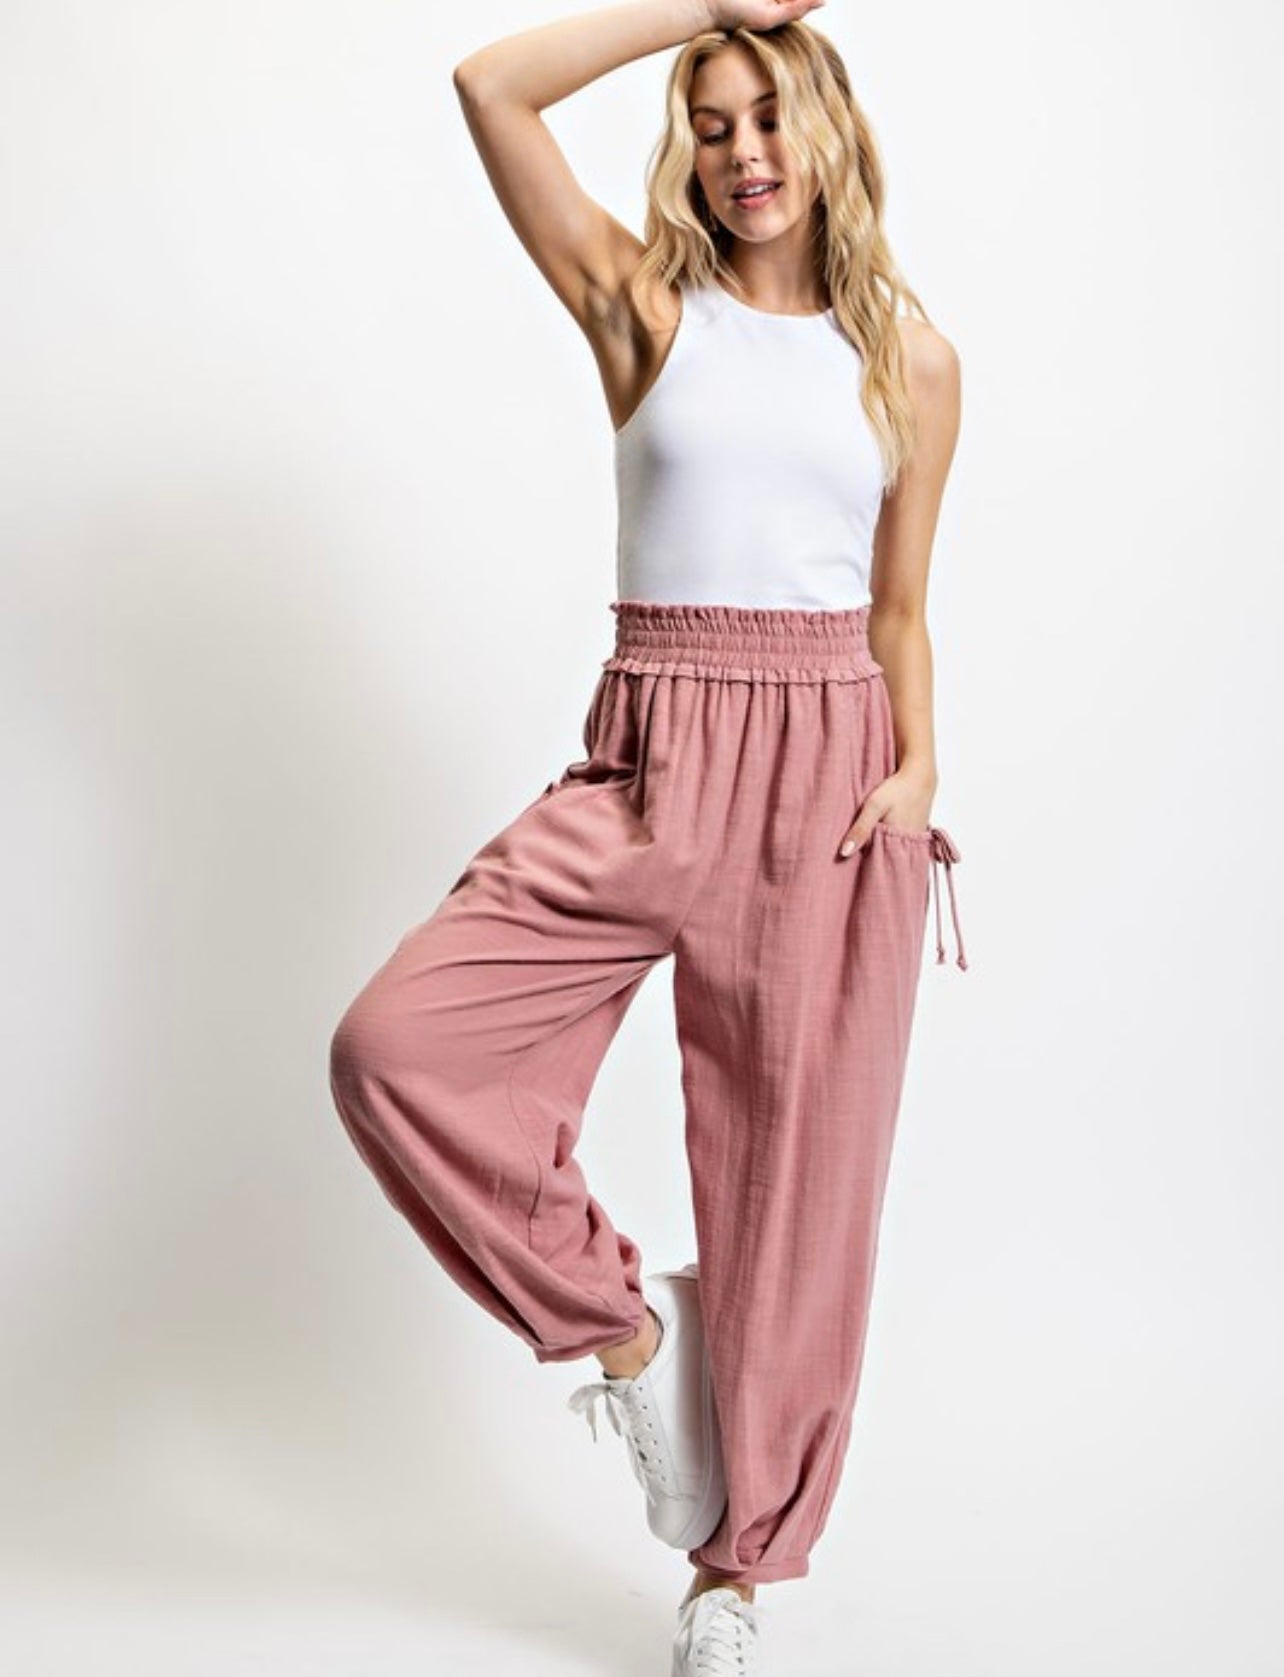 VICTORIA RELAXED FIT PANTS